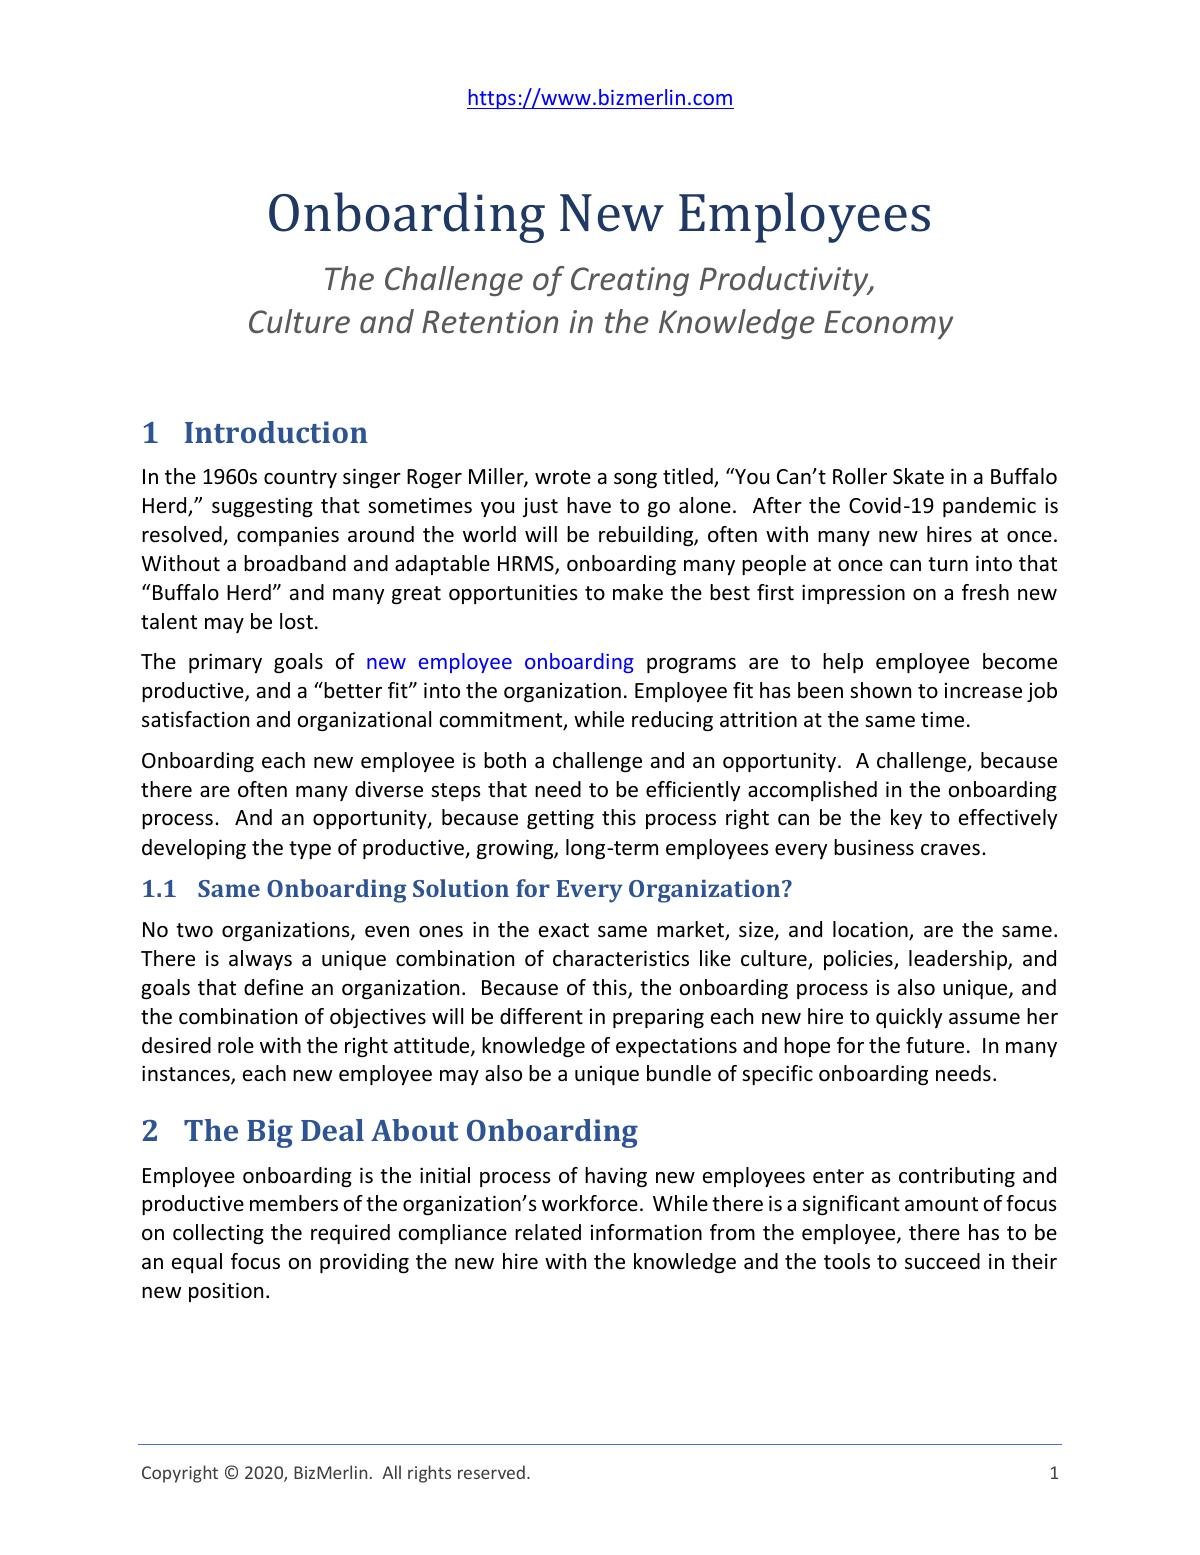 Onboarding New Employees | Challenge of Creating Productivity, Culture and Retention